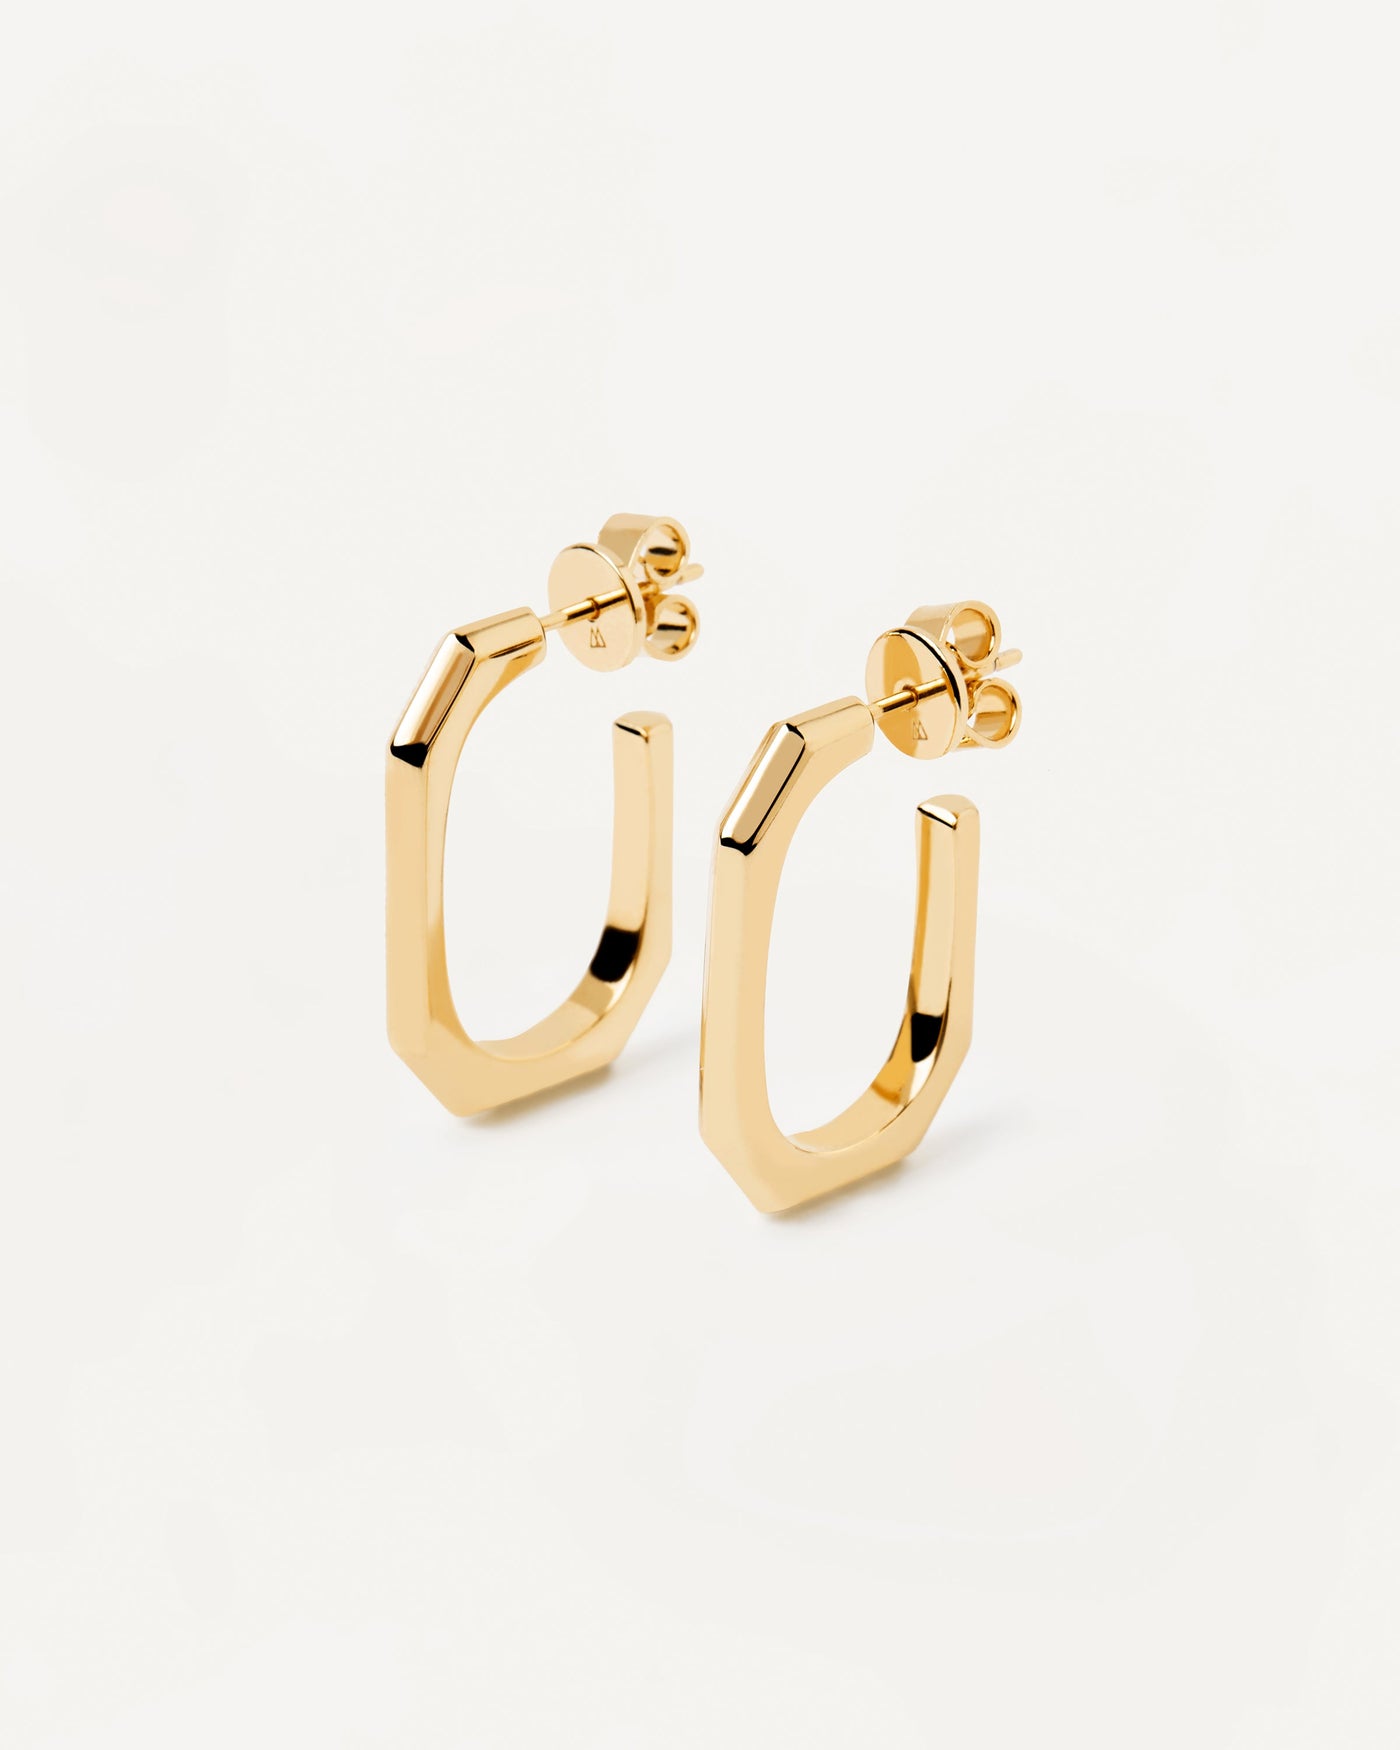 2023 Selection | Signature Link Earrings. Octogonal plain earrings shaped as cable links in 18K gold plating. Get the latest arrival from PDPAOLA. Place your order safely and get this Best Seller. Free Shipping.